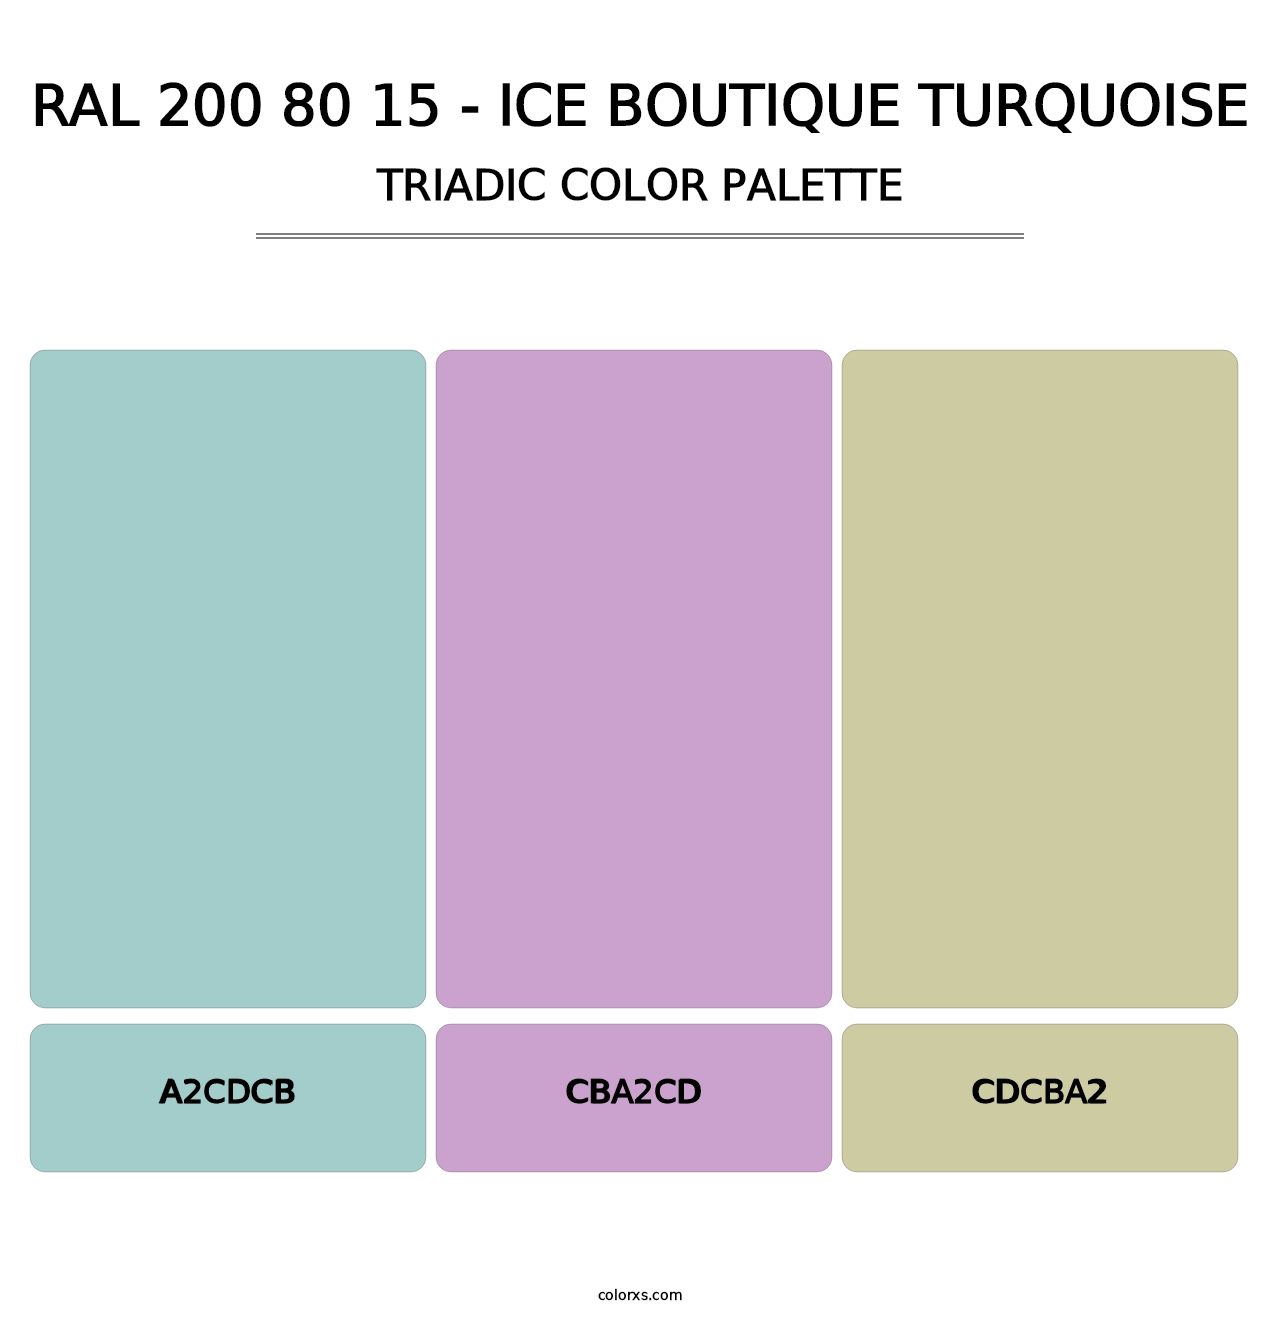 RAL 200 80 15 - Ice Boutique Turquoise - Triadic Color Palette